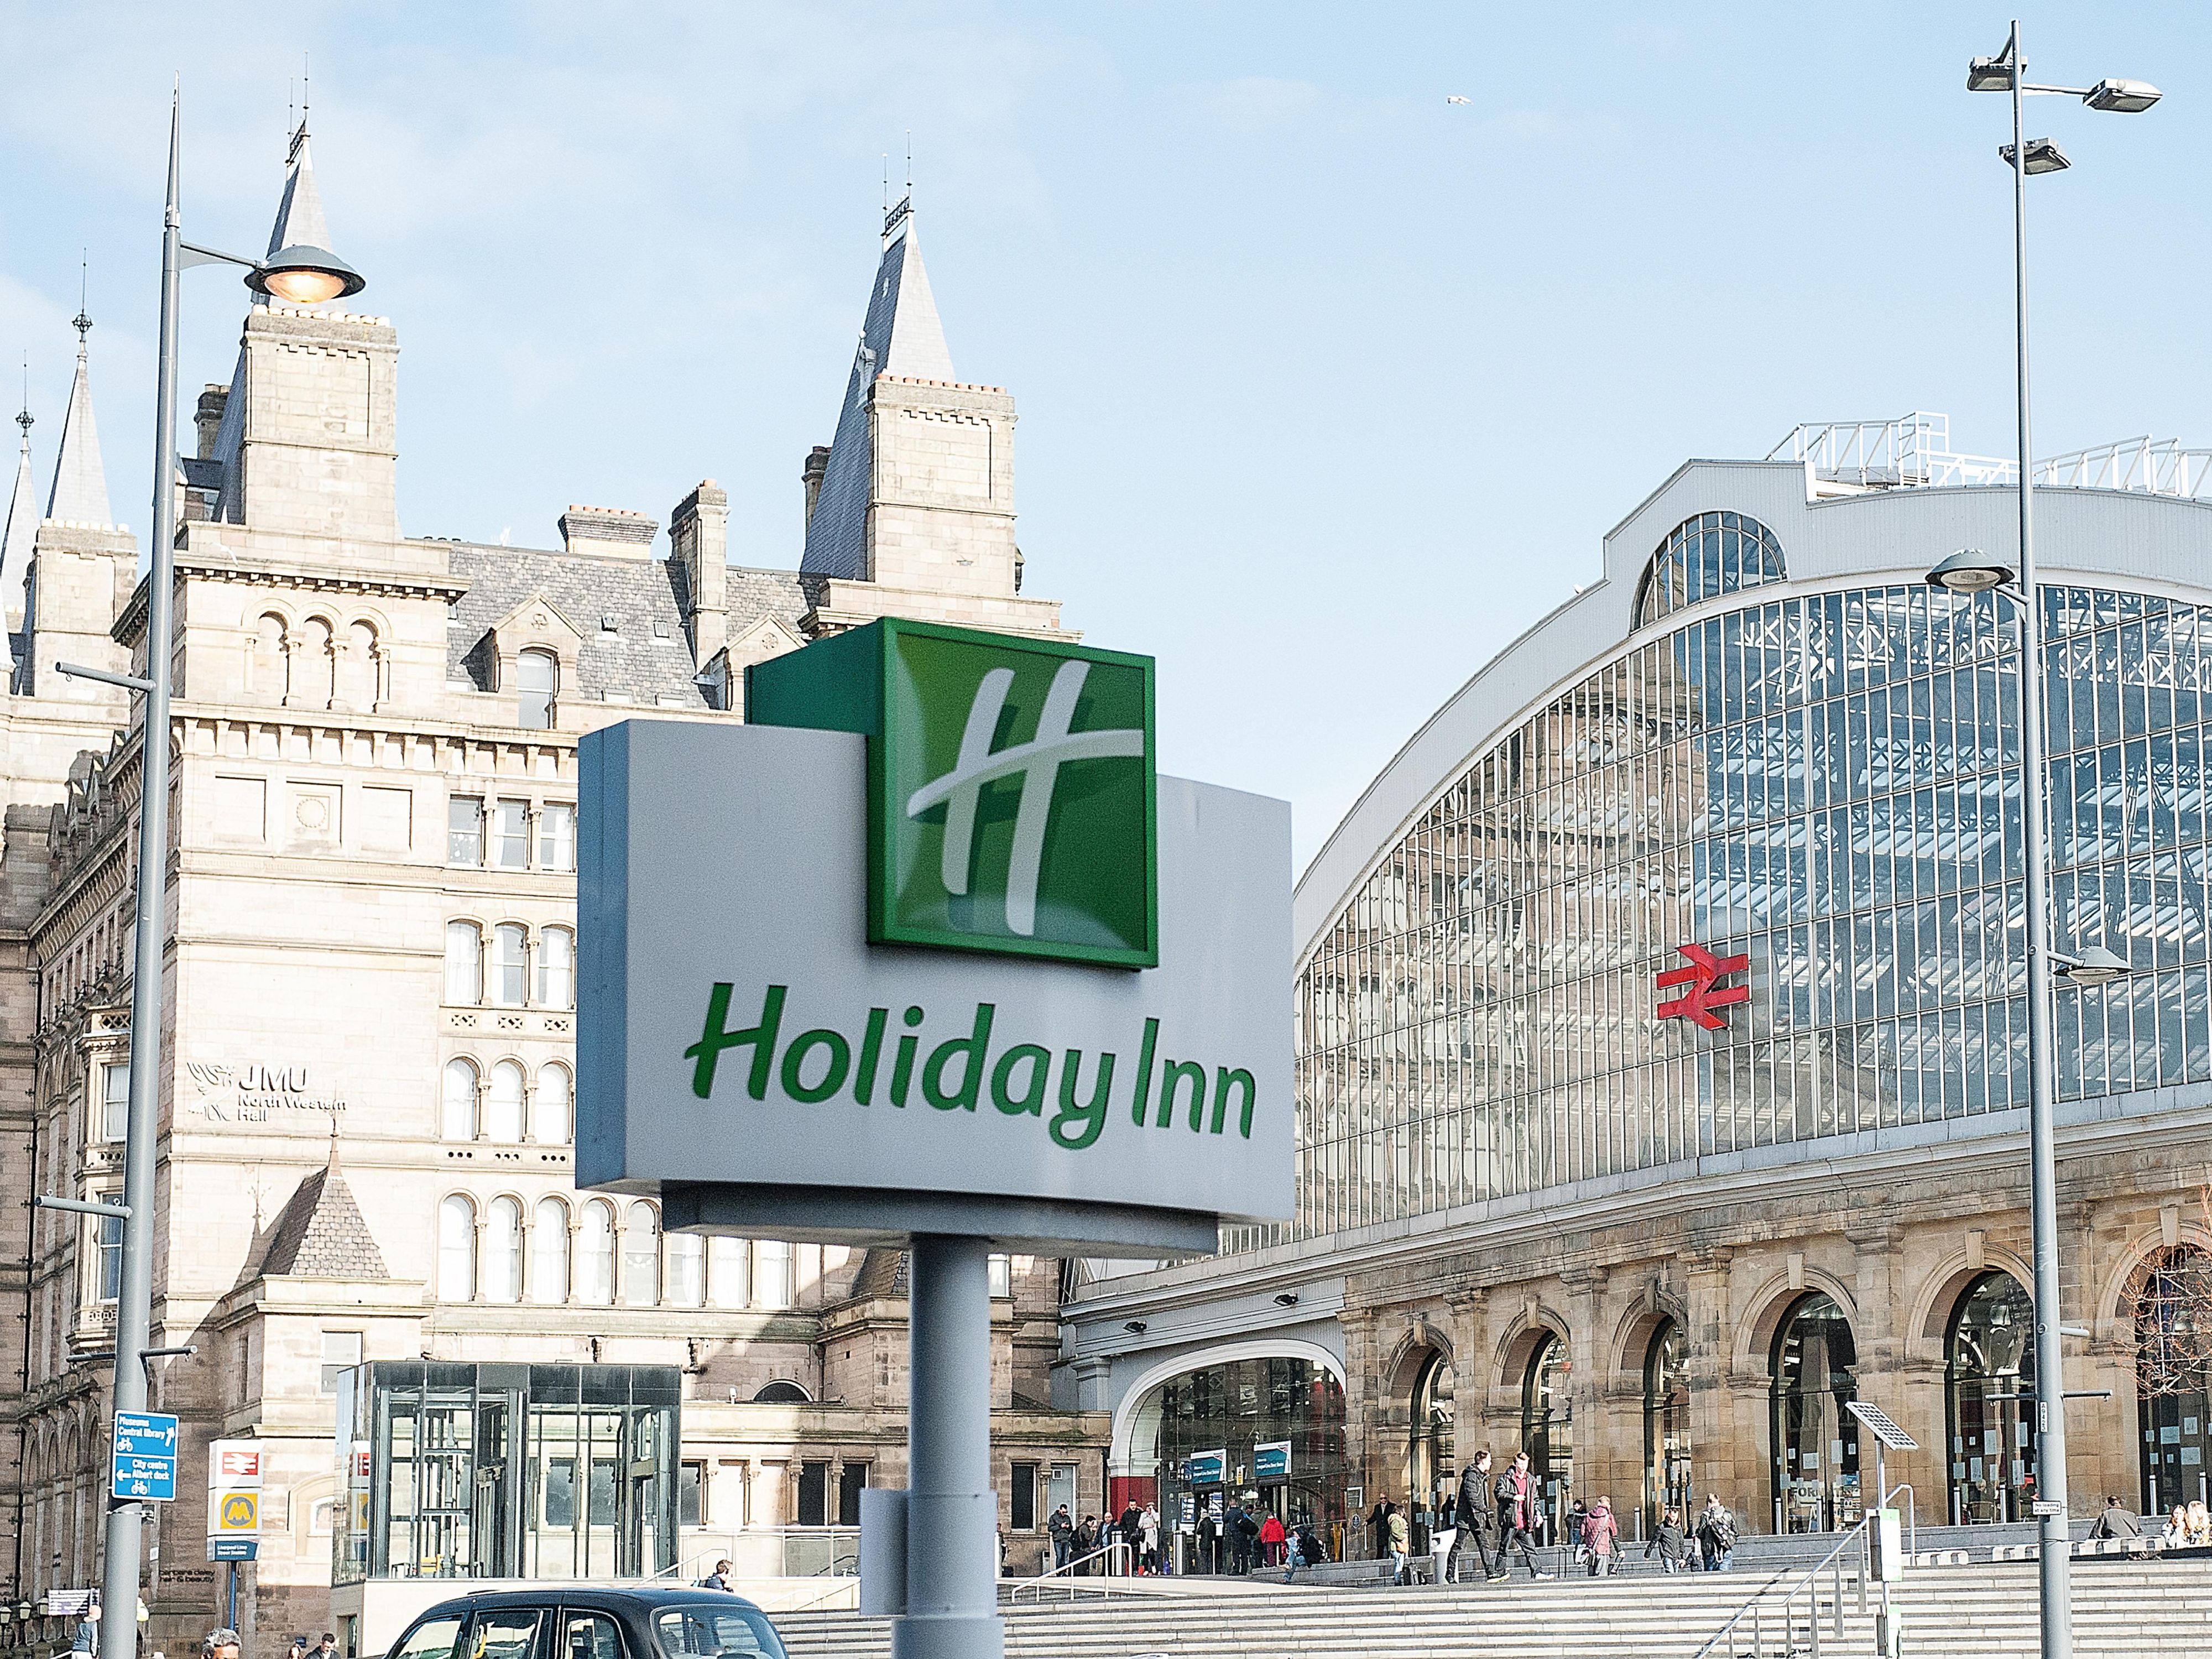 Located directly opposite Lime St Station, we are in the heart of the city.  Complimentary use of our luggage room, for pre-check-in and post-checkout, means you can maximize your time in Liverpool. Hotel to the platform in less than 5 mins! 